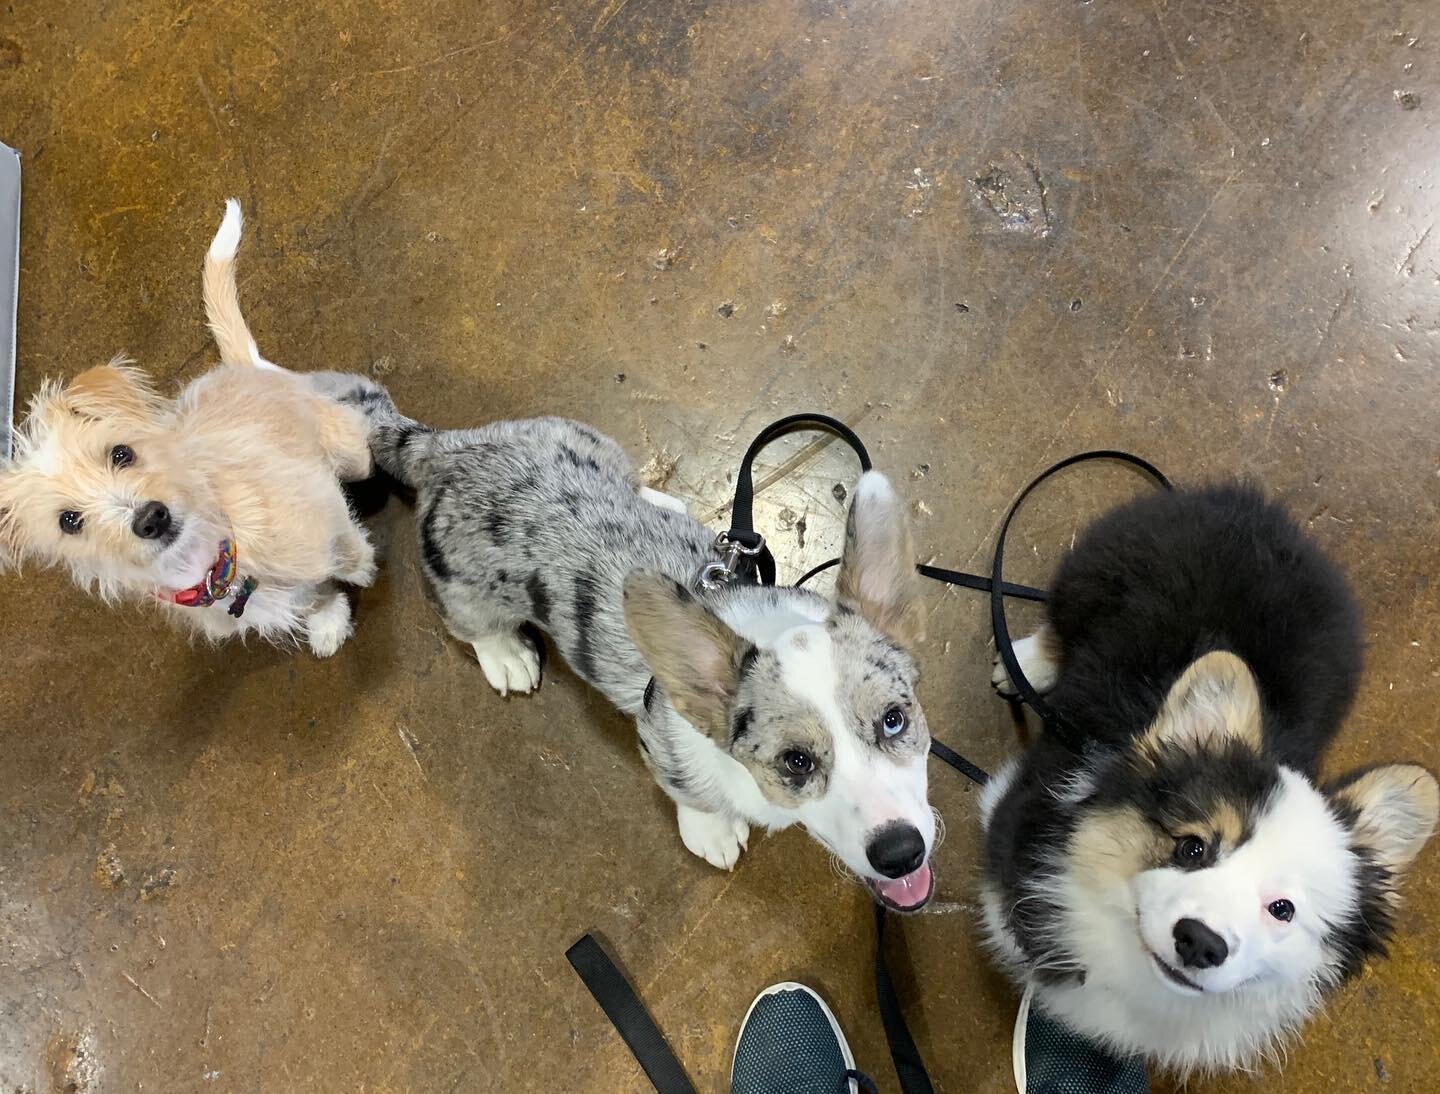 Much like humans, individuality is what makes puppies special. We love each and every one of their unique personalities. Hooray for diversity 🥰🐶🤗!!! #wonderpuppypdx #puppylife #portlanddogtraining #forcefree #socialpuppywp #positivereinforcement